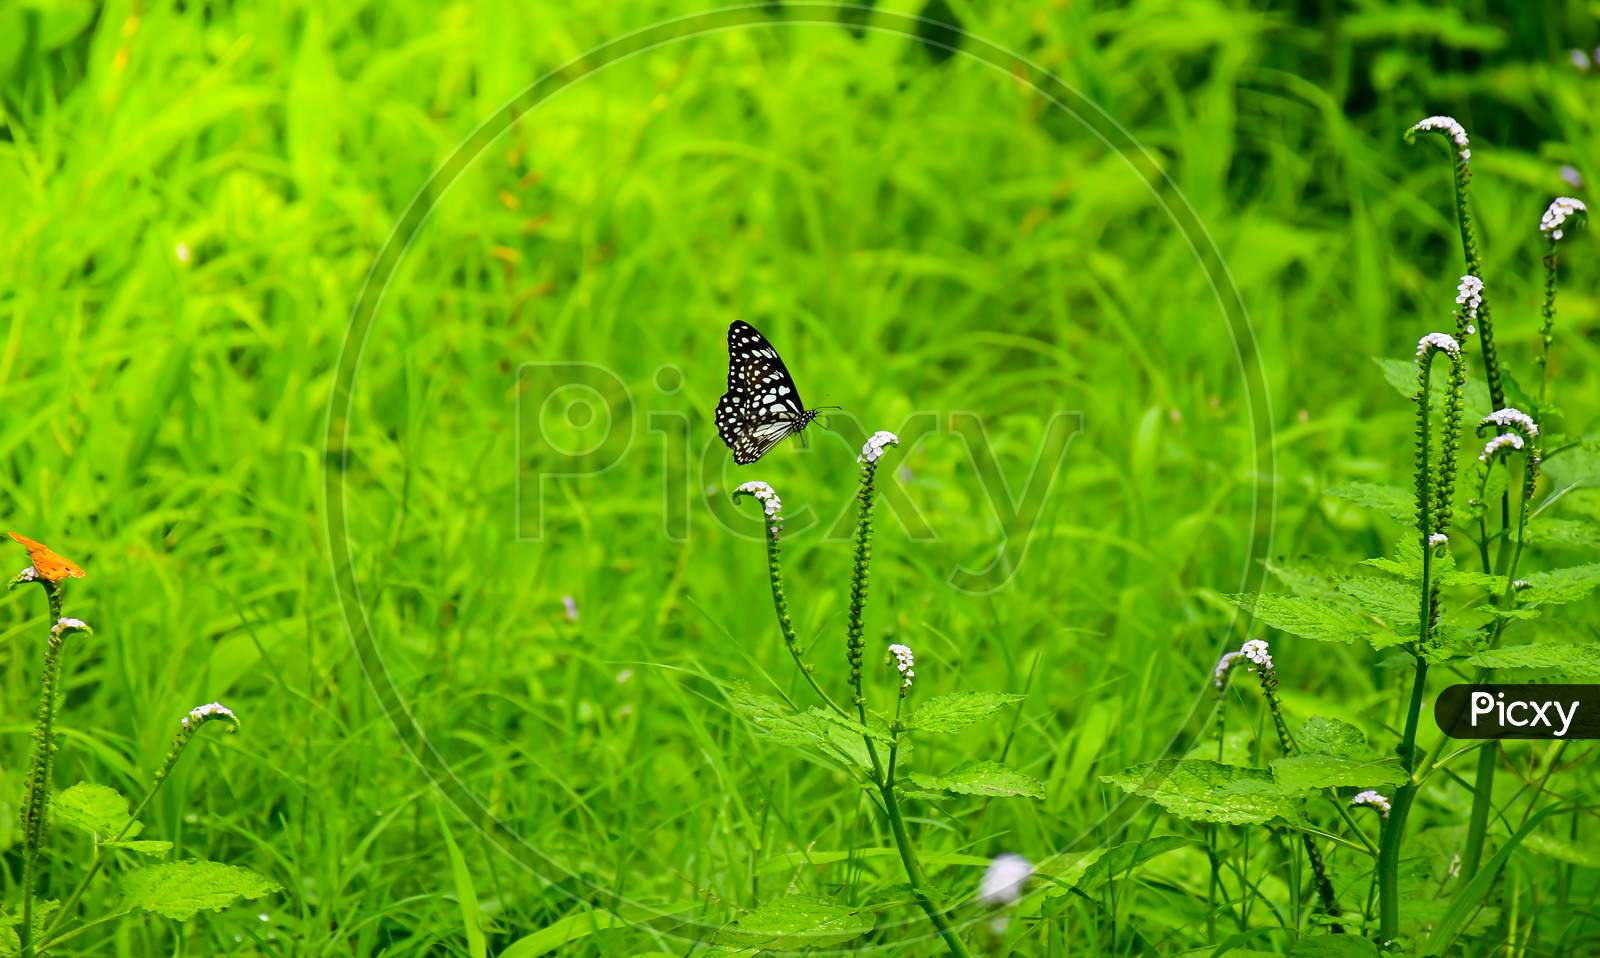 A Blue Tiger Butterfly Flying In The Air With Natural Background